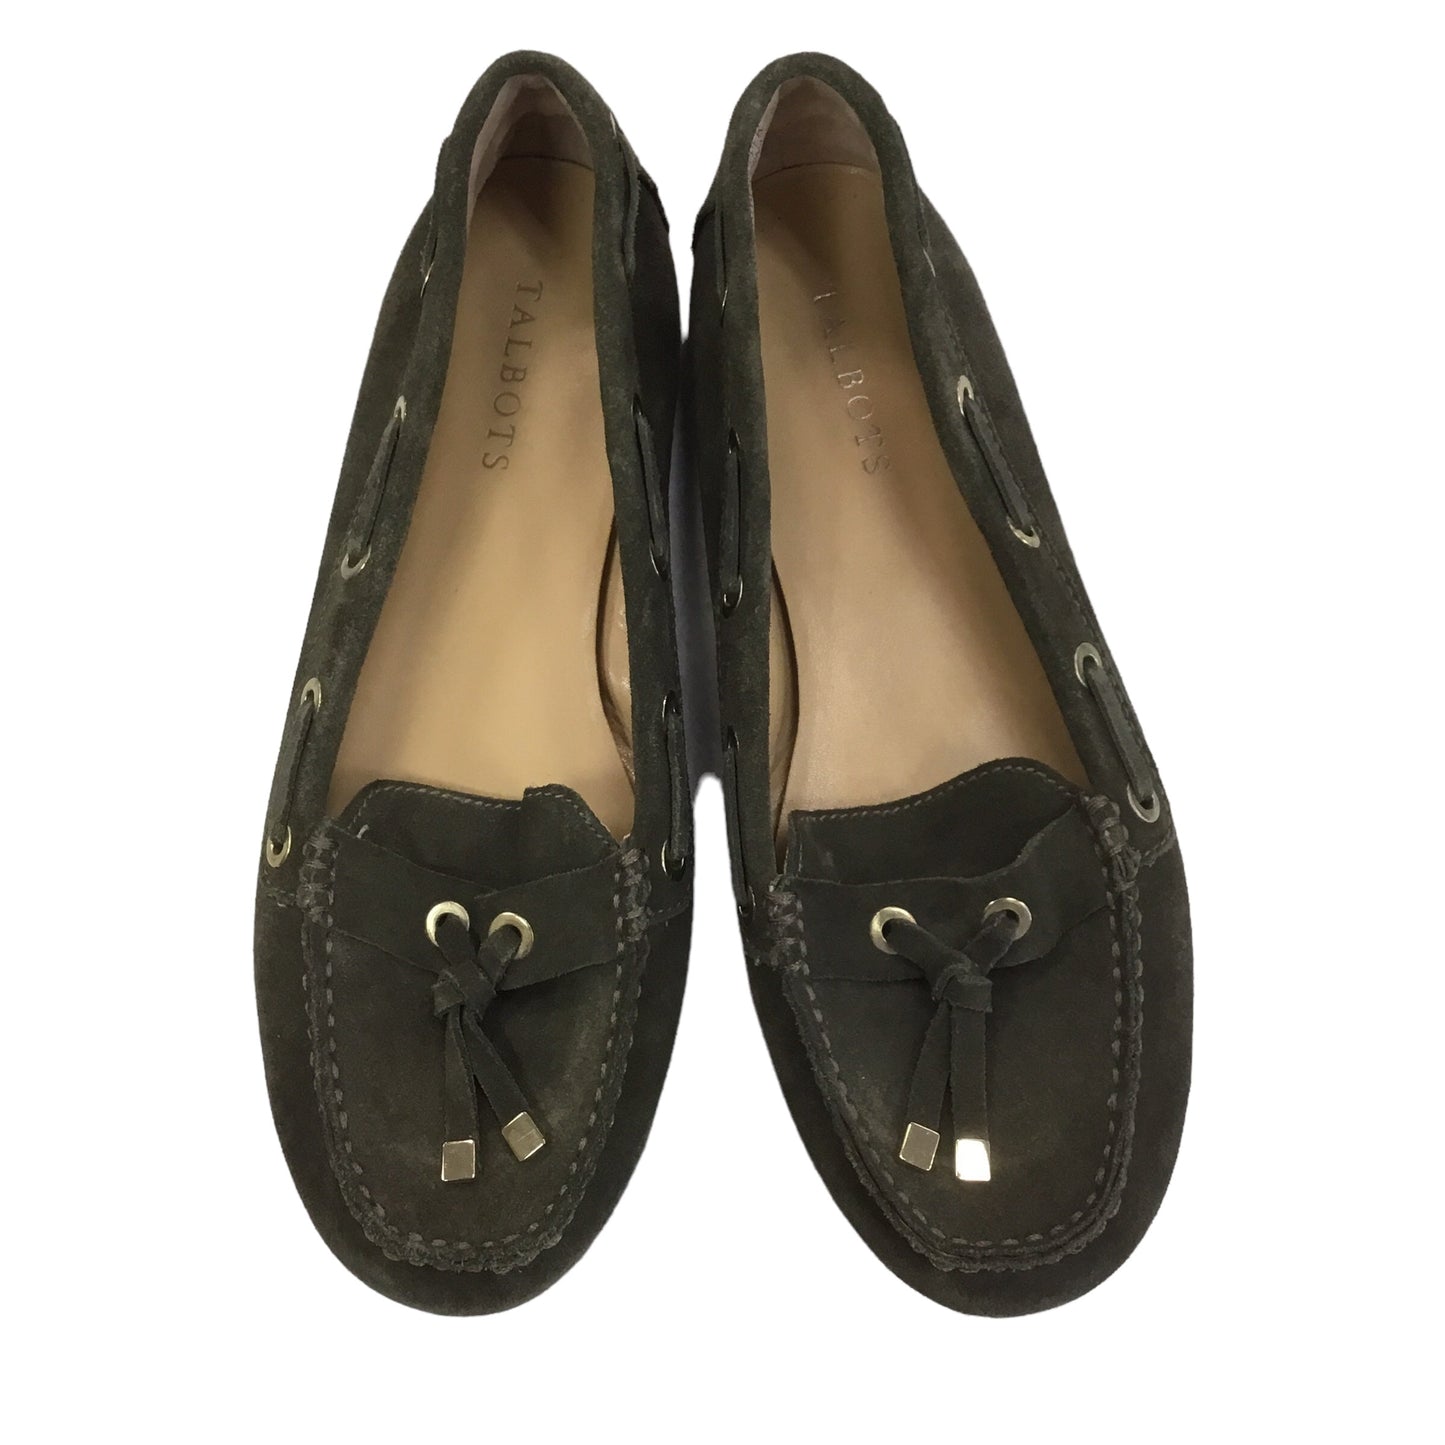 Shoes Flats By Talbots  Size: 8.5